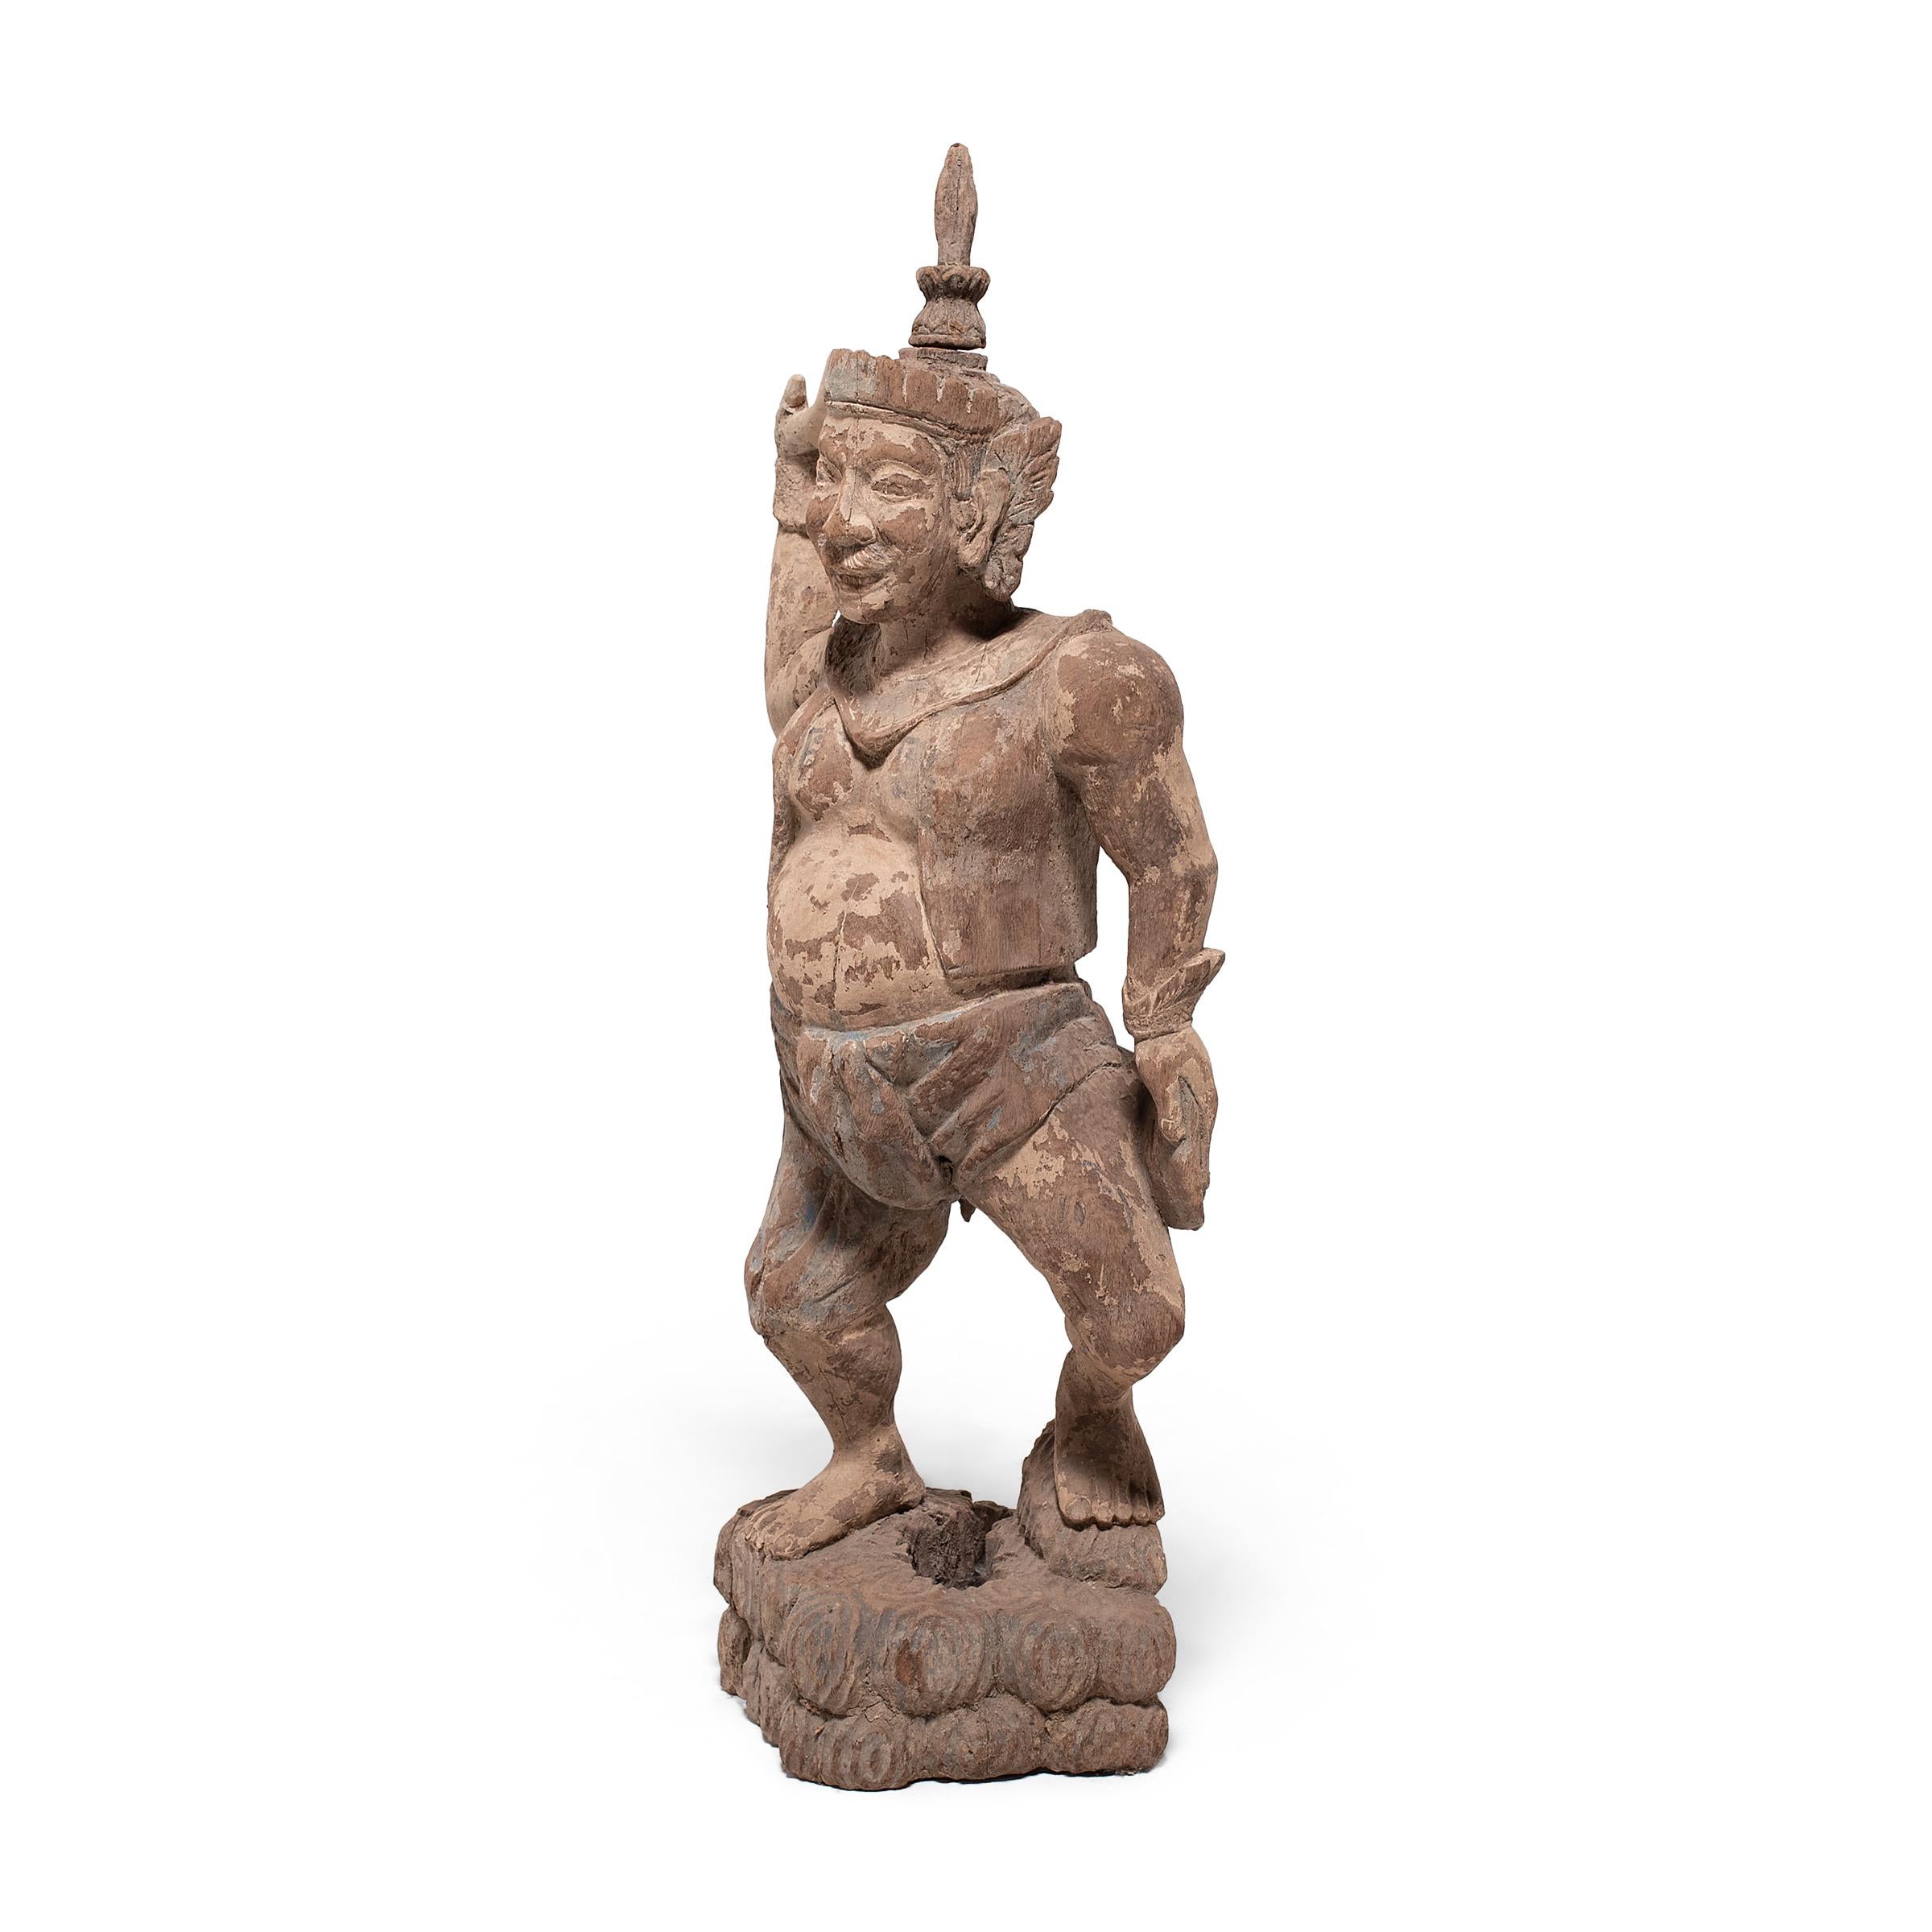 This large polychromed wood figure from southeast Asia dates to the mid-19th century and depicts a male attendant or entertainer. Hand-carved by a skilled artisan, the wooden figure is dressed in a vest and cloth pants and wears a traditional